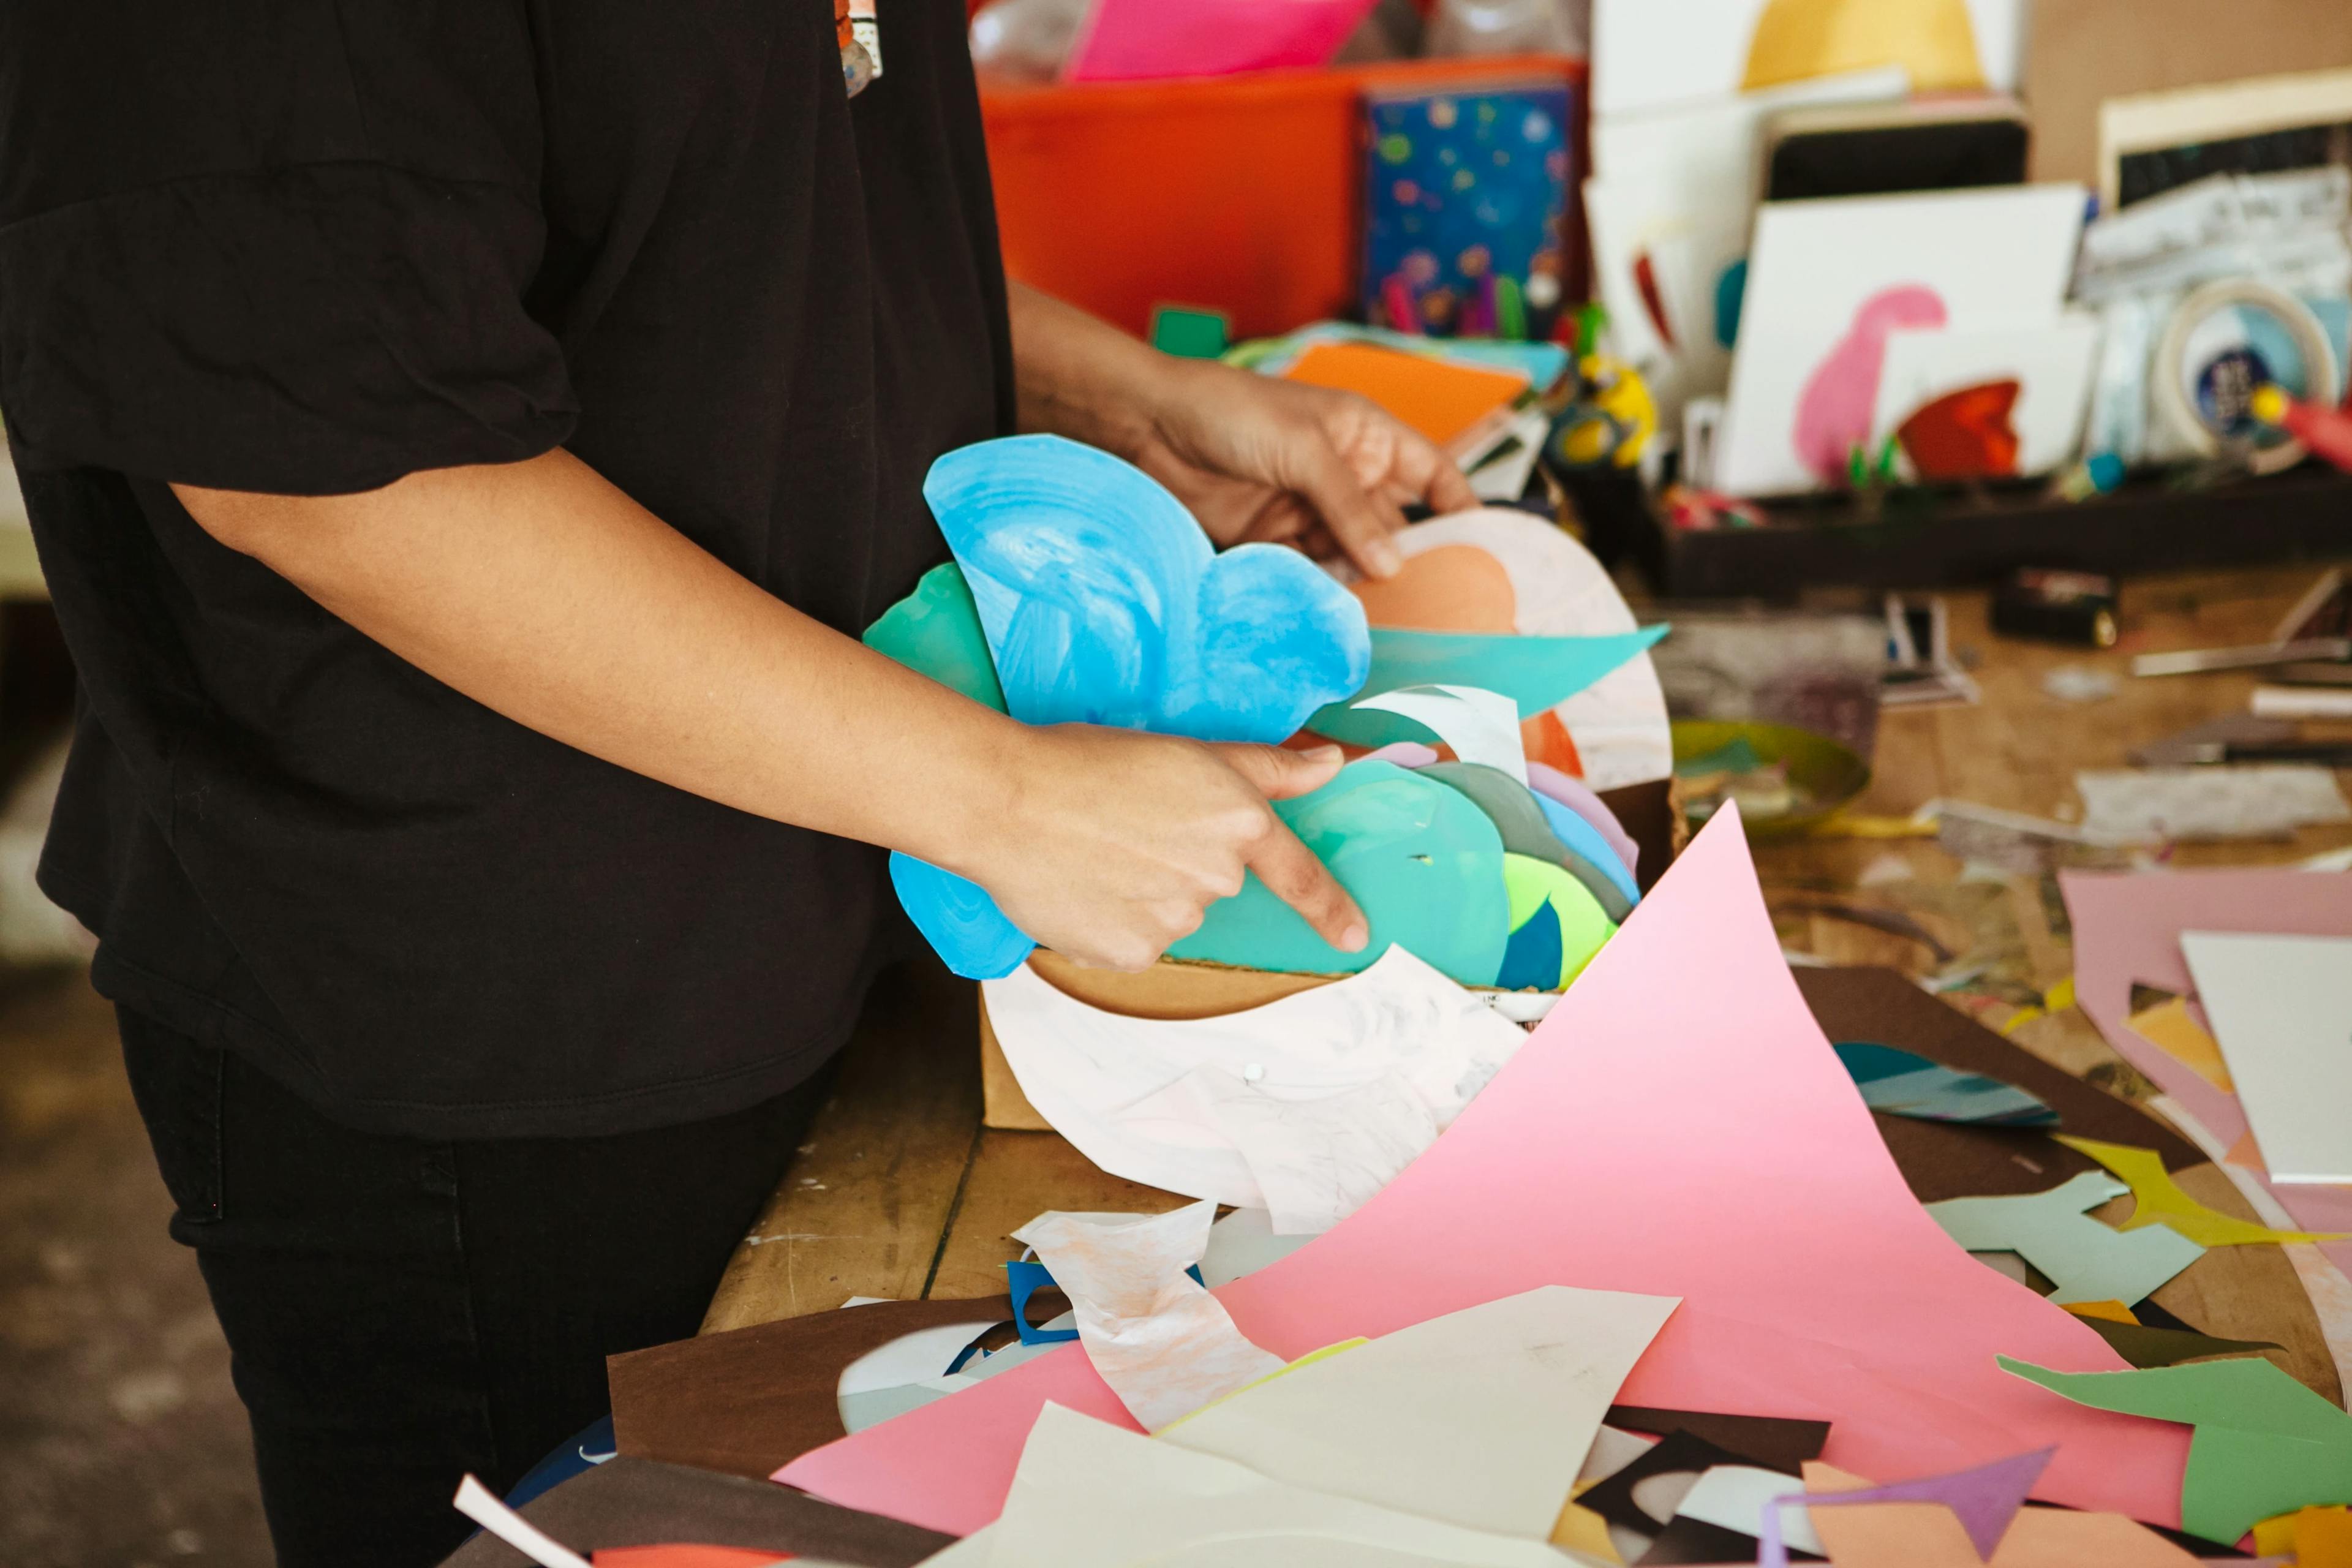 Artist Xochi Solis holding pieces of cut-up colored paper for her collages.